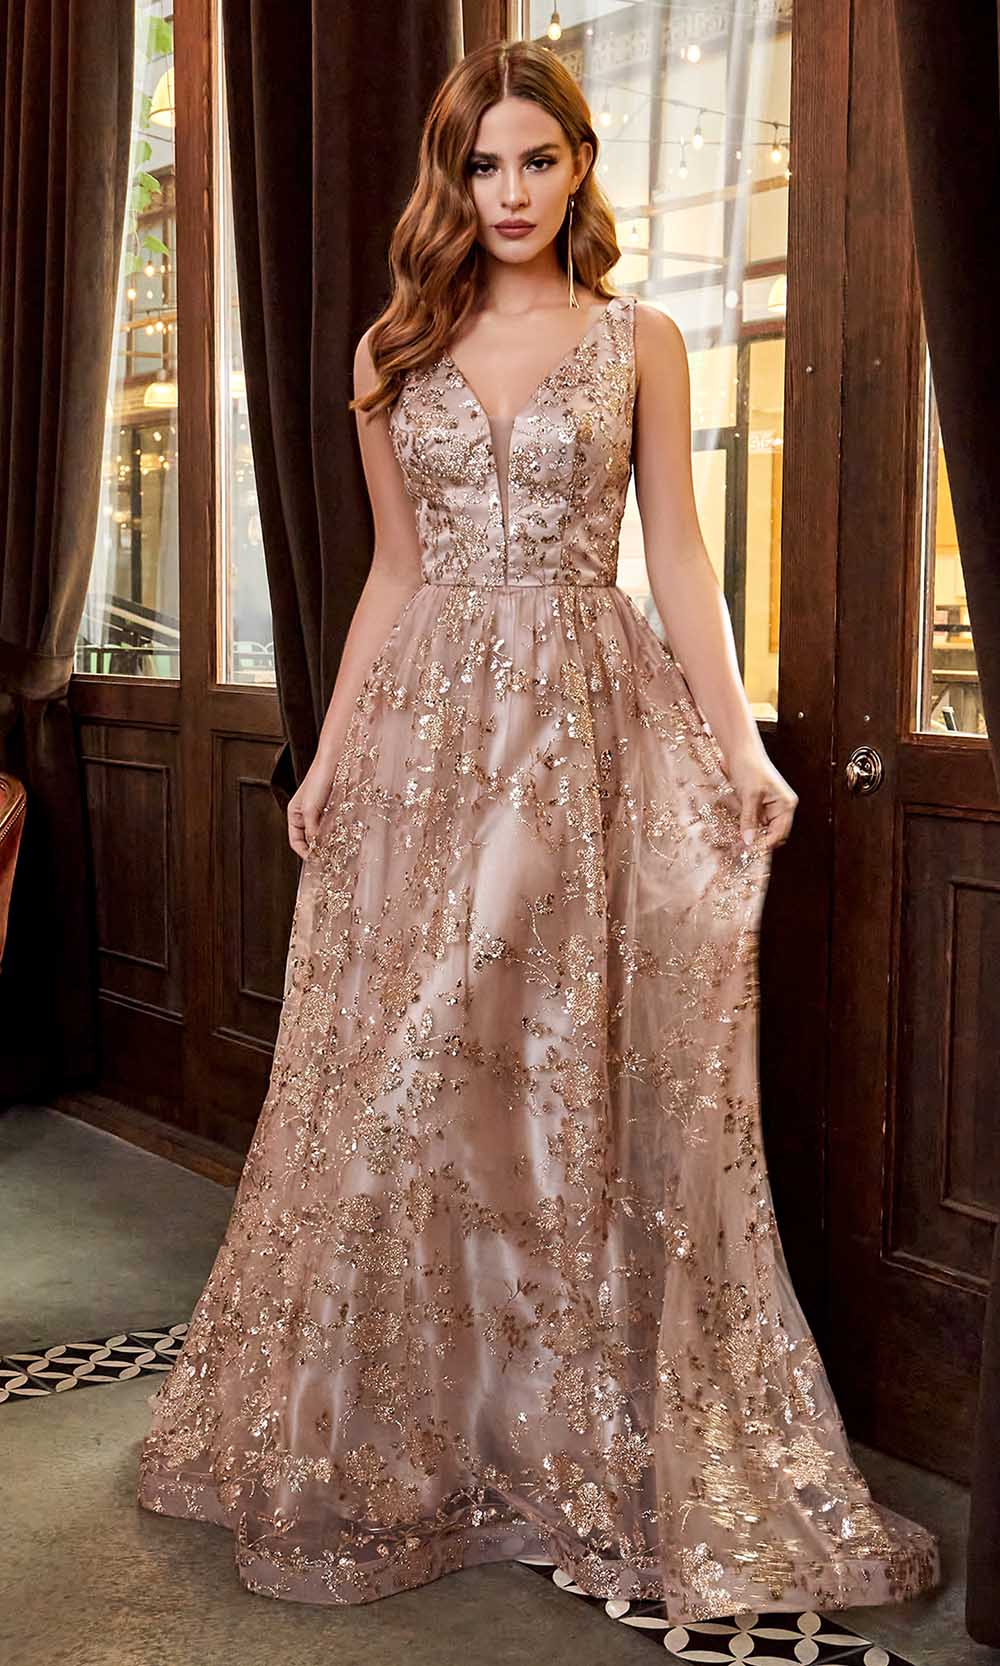 Cinderella Divine - CB068 Plunging V Neck Floral Metallic Print Gown In Mocha and Gold